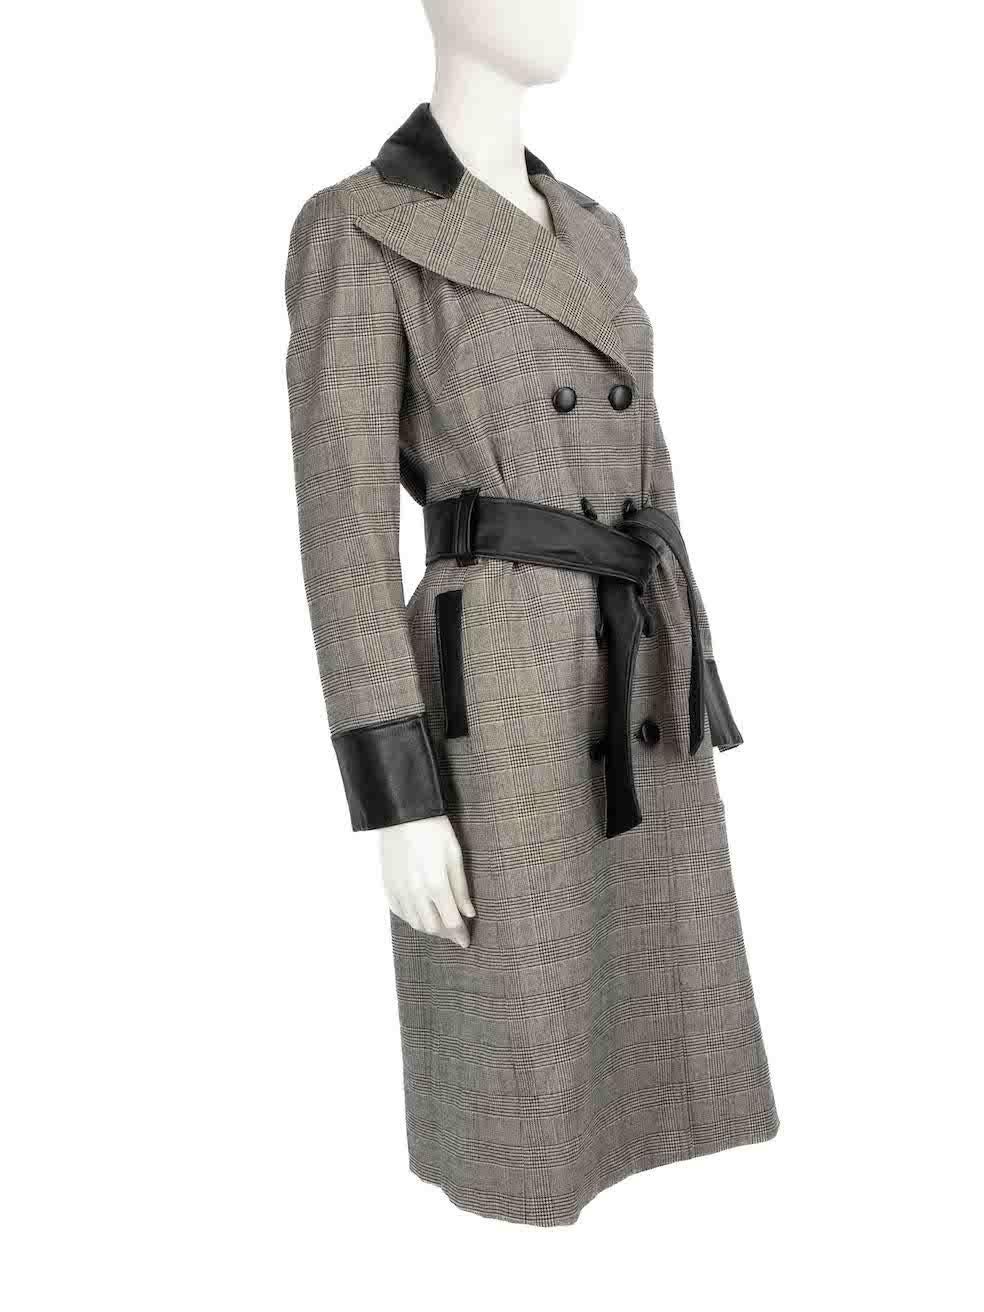 CONDITION is Very good. Minimal wear to coat is evident. Minimal wear to the fabric composition with a couple of very small plucks to the weave seen down the front and a slight musty odor to the fabric on this used D&G designer resale item.
 
 
 
